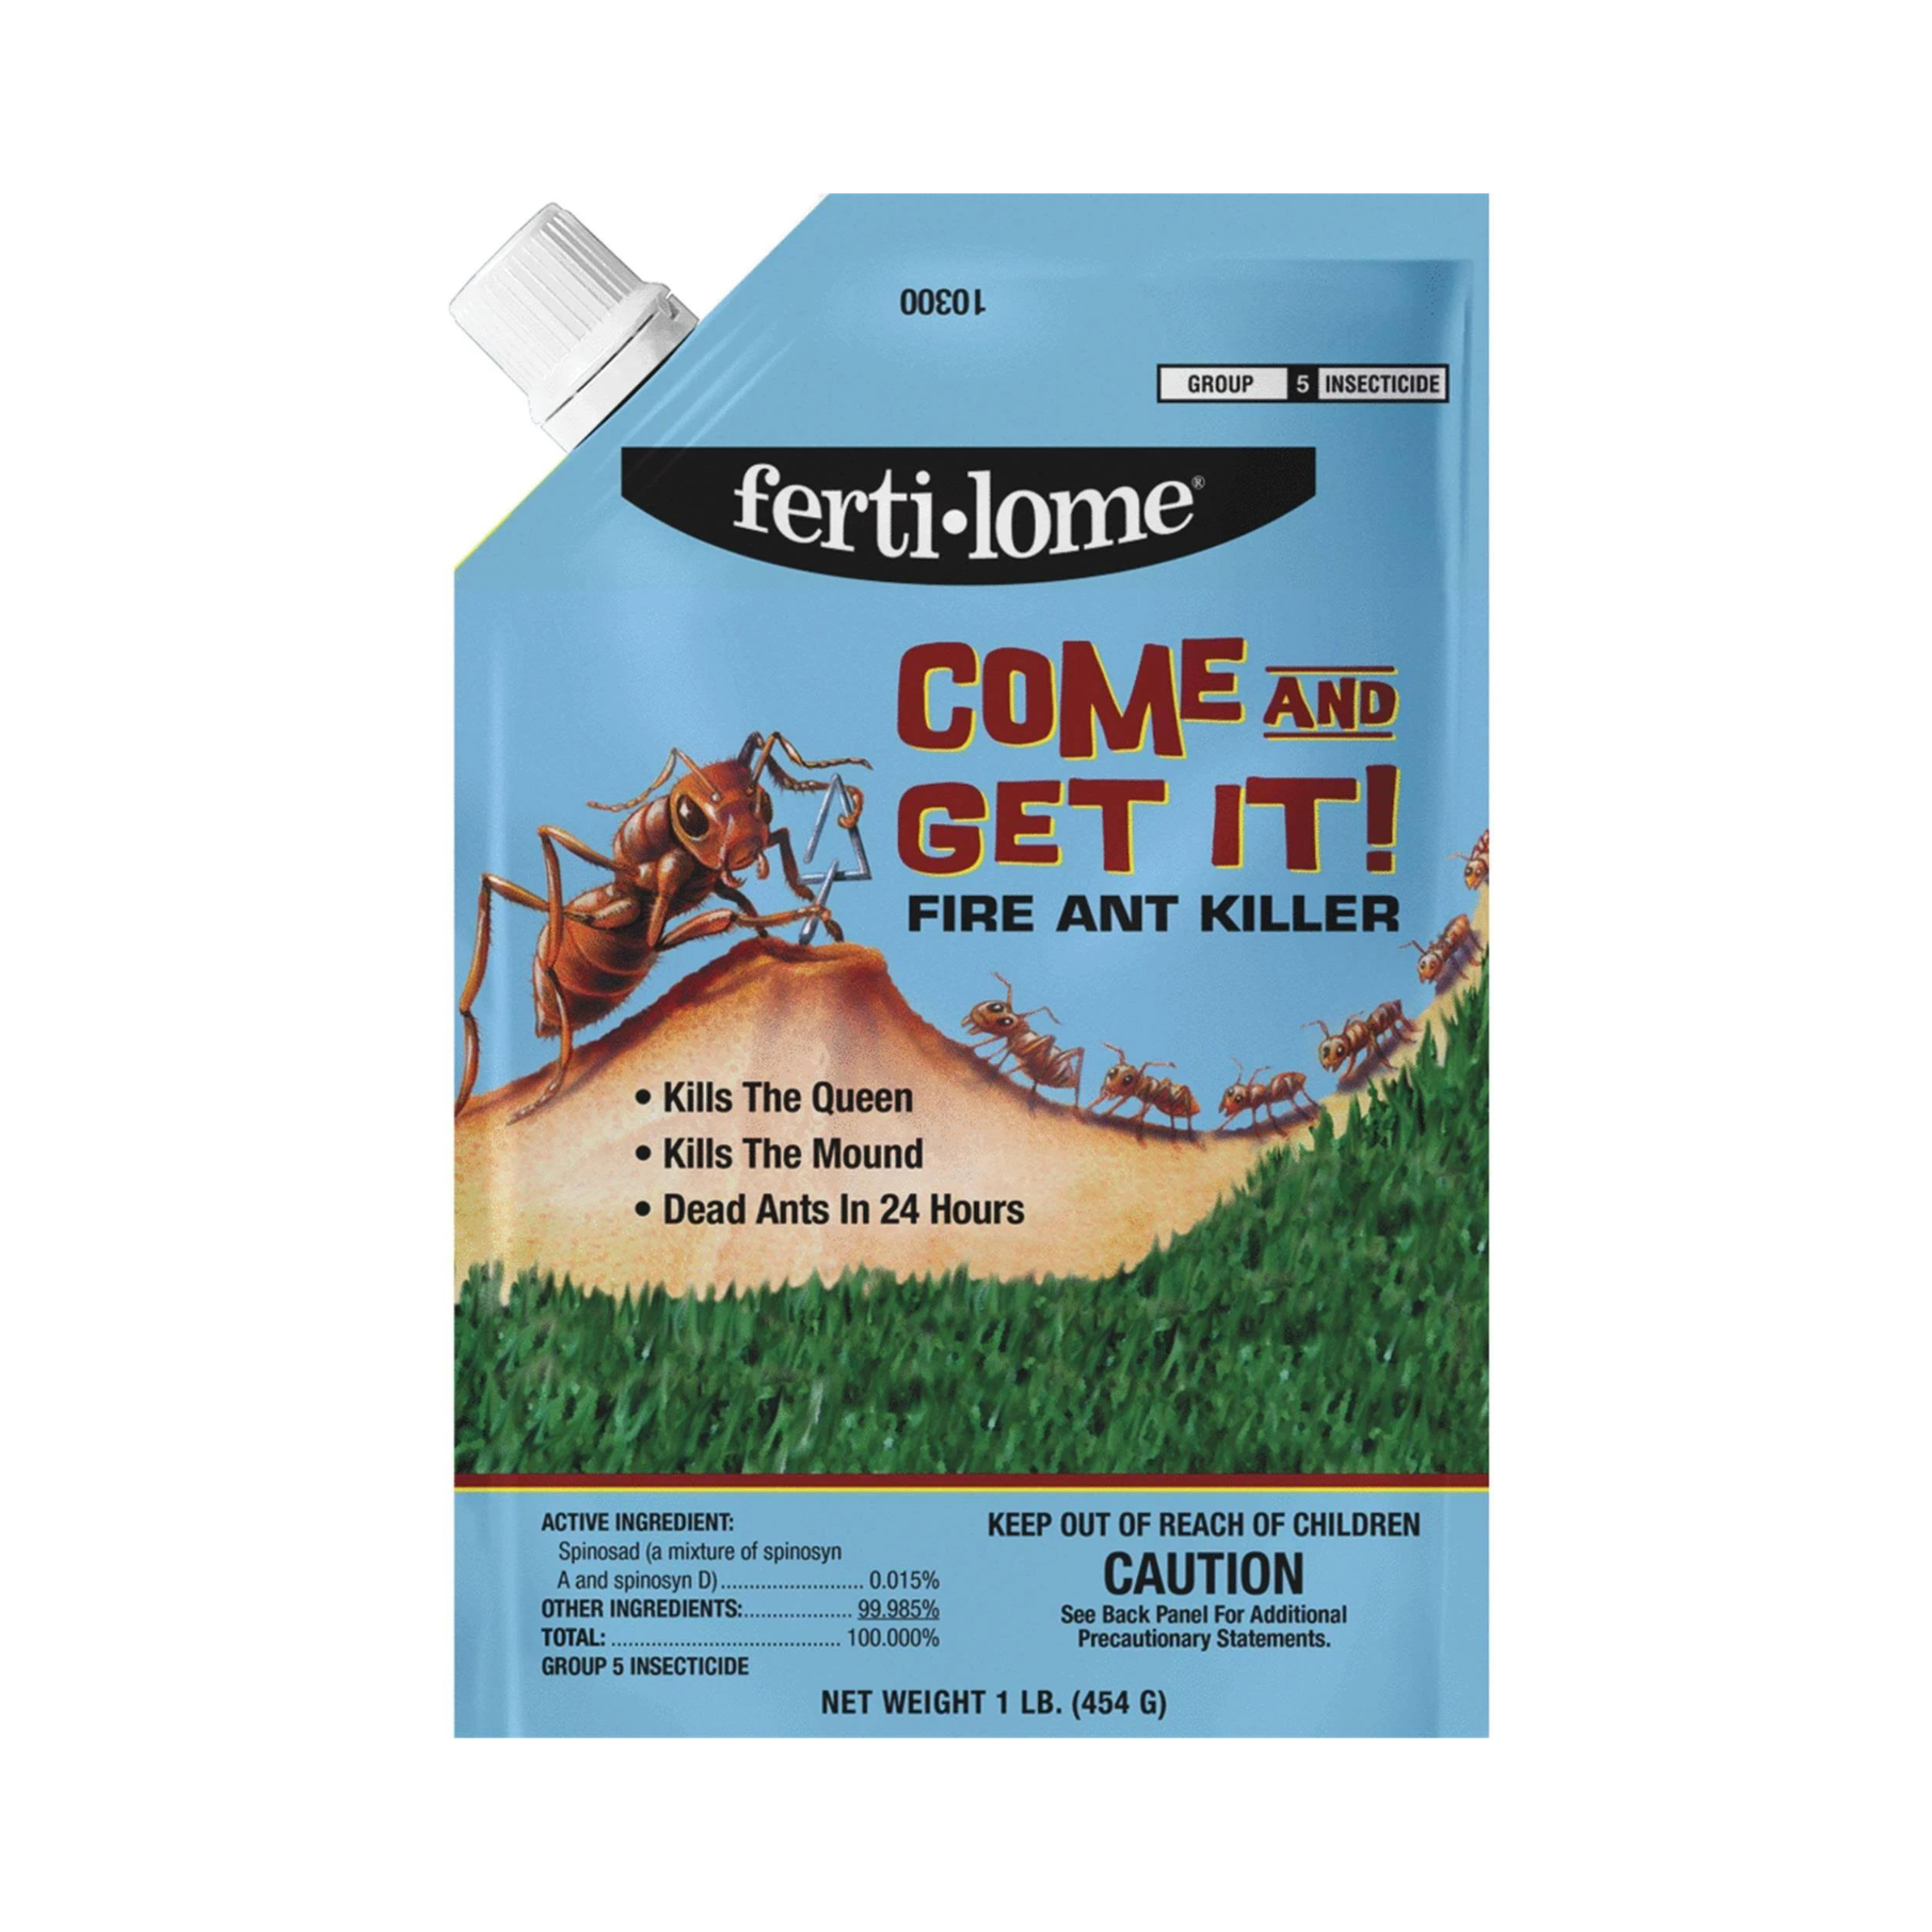 Fertilome Come And Get It Fire Ant Killer